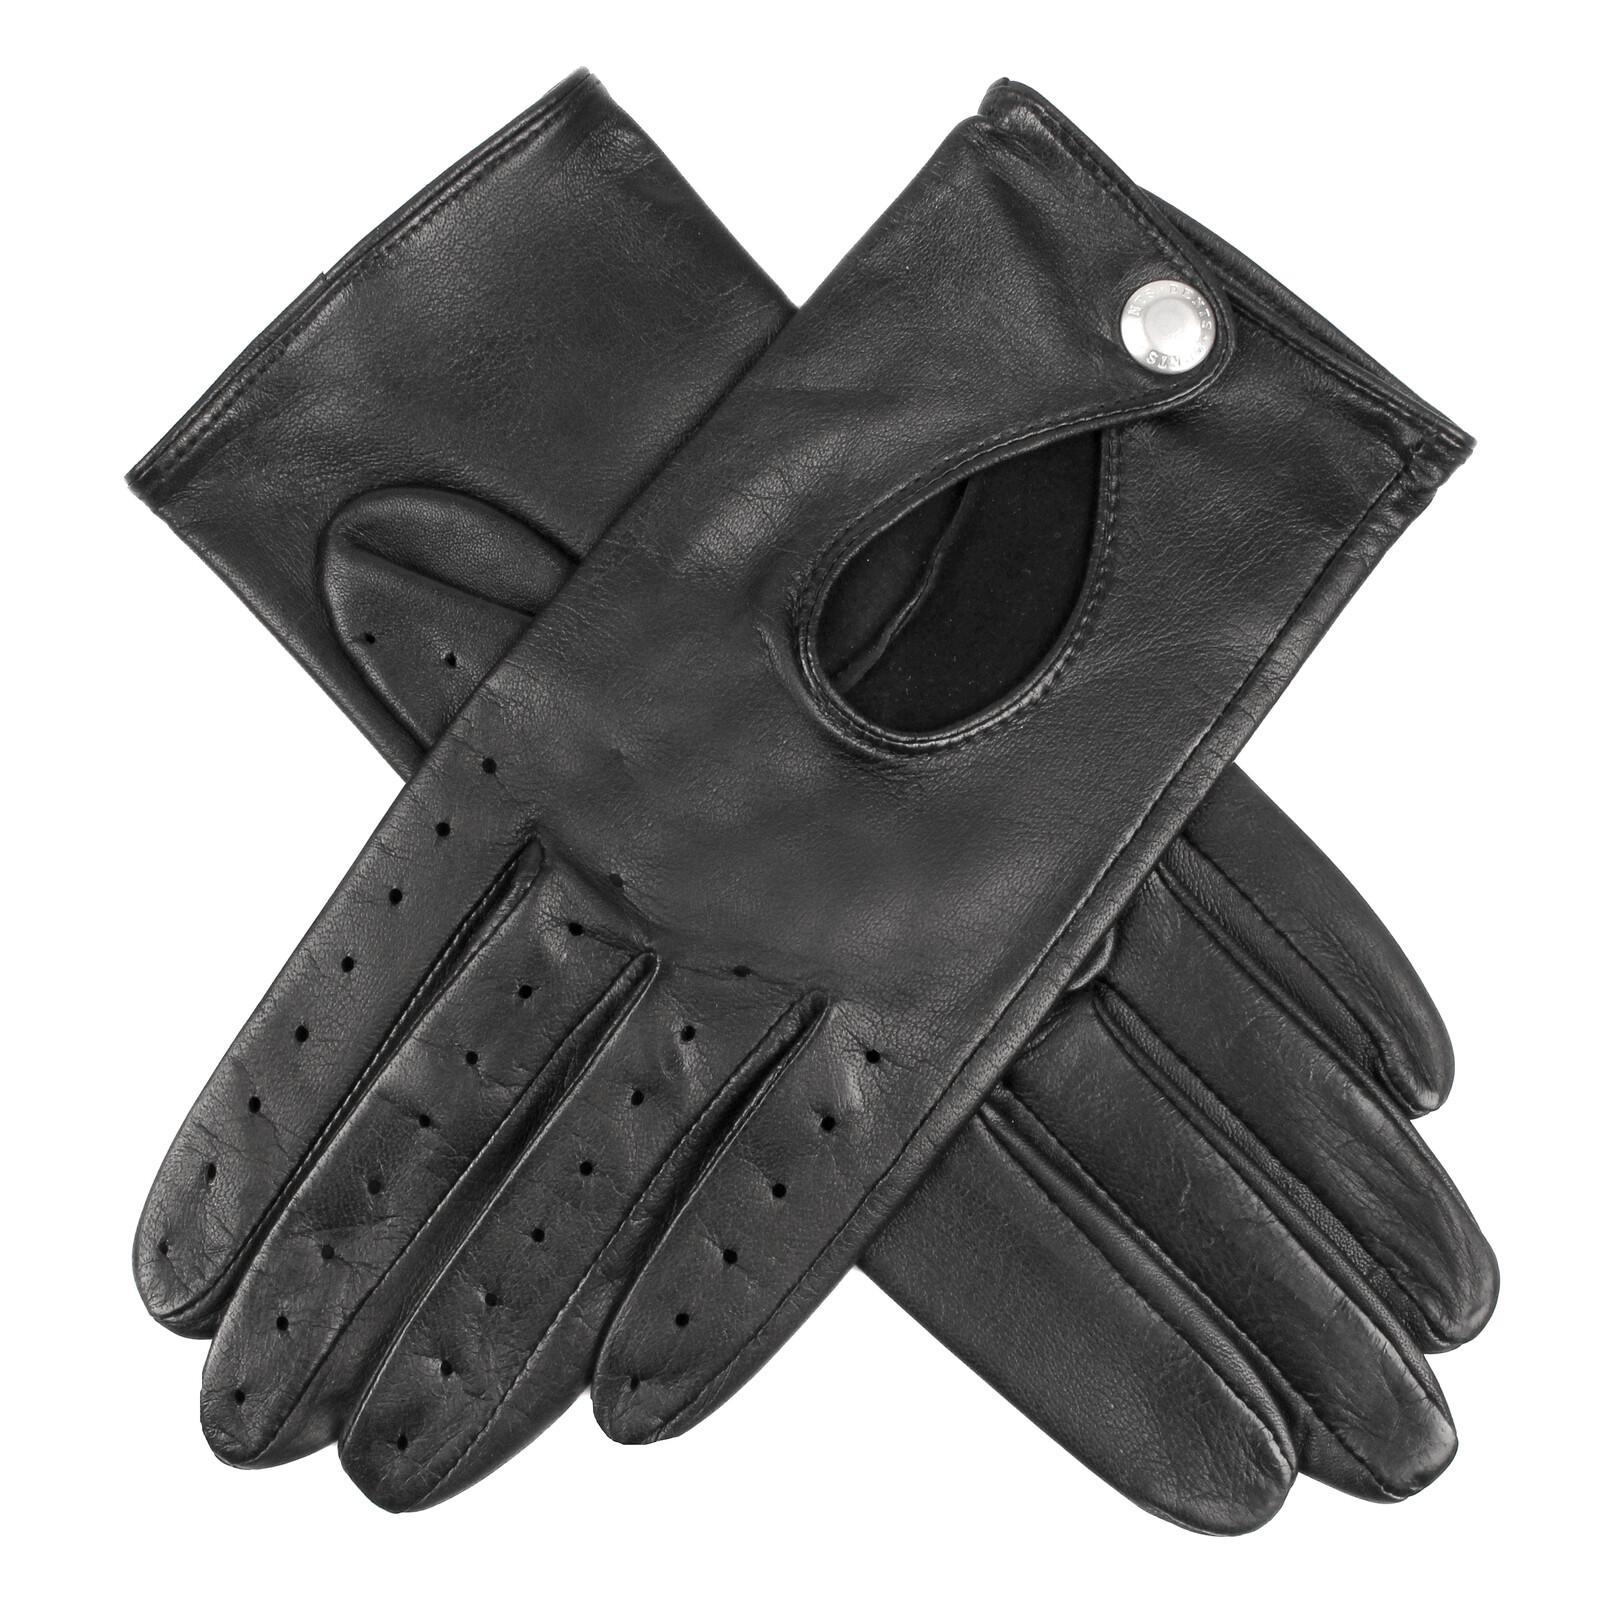 Classic Black Leather Driving Gloves - Black - Large